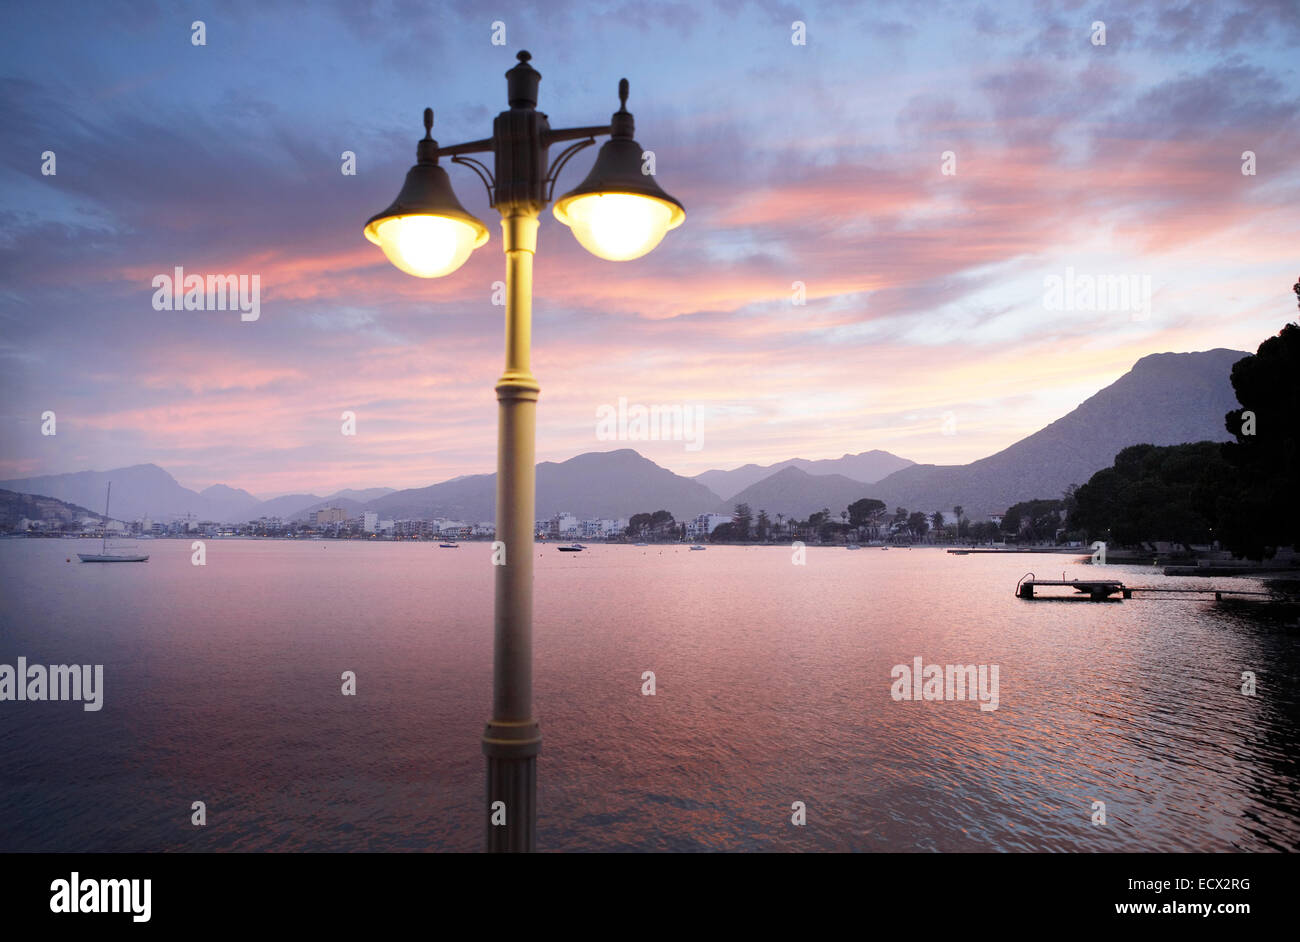 View of illuminated street light with bay and mountains in background Stock Photo